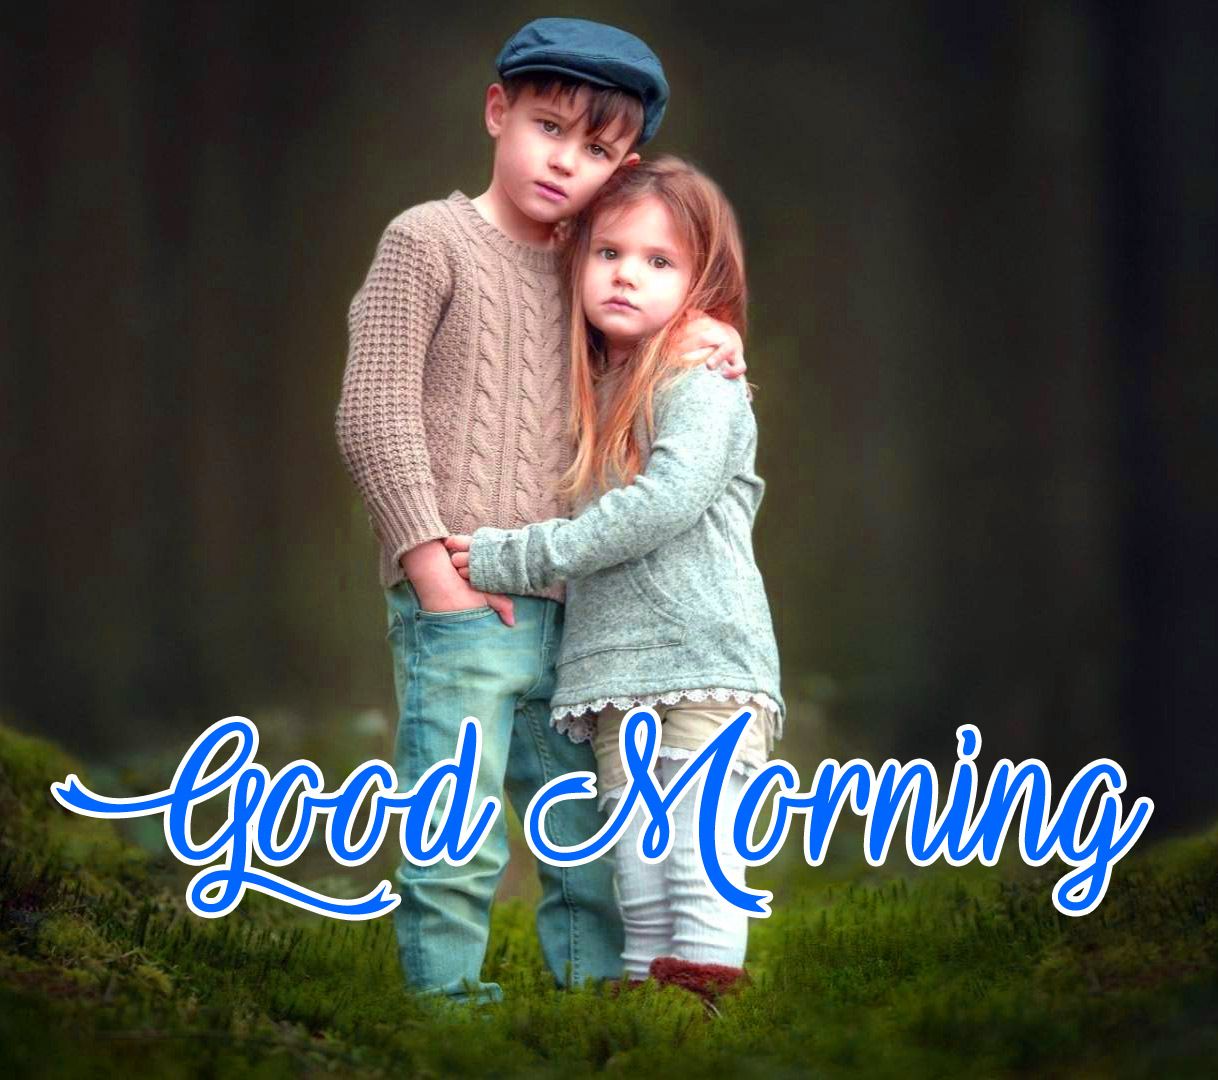 Good Morning Image For Brother and Sister HD Download